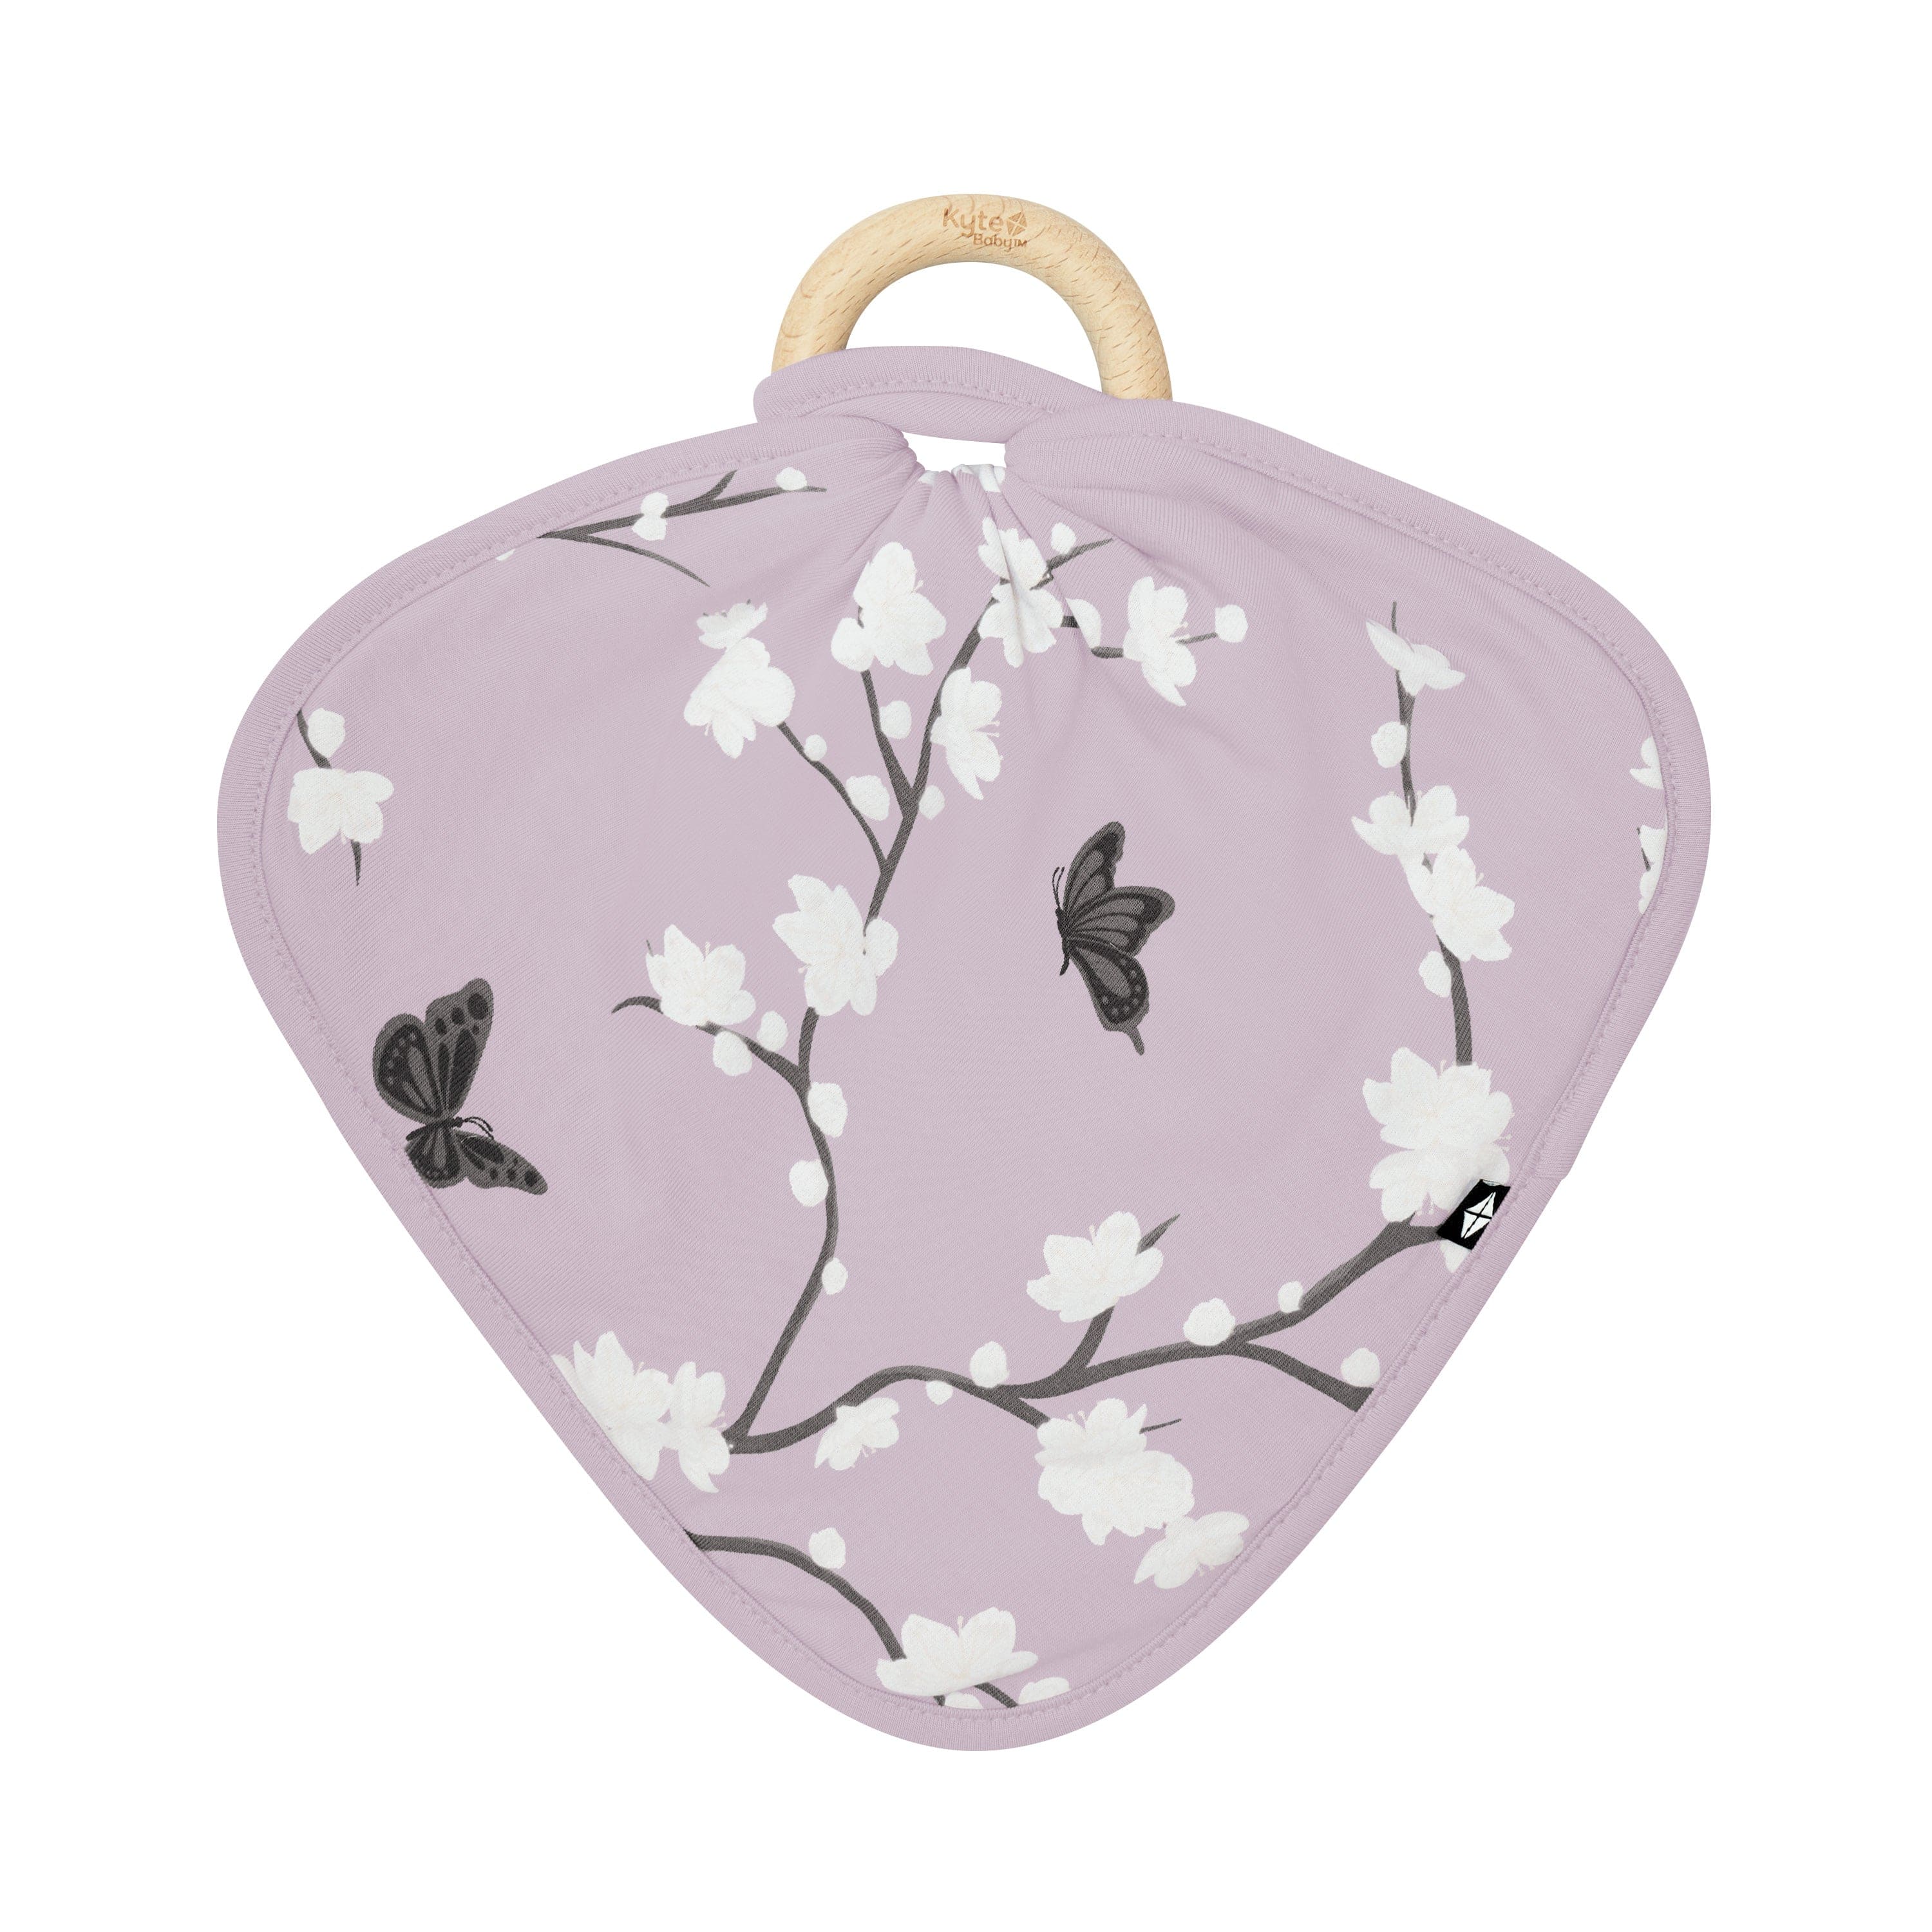 Kyte Baby Lovey Cherry Blossom / Infant Lovey in Cherry Blossom with Removable Teething Ring